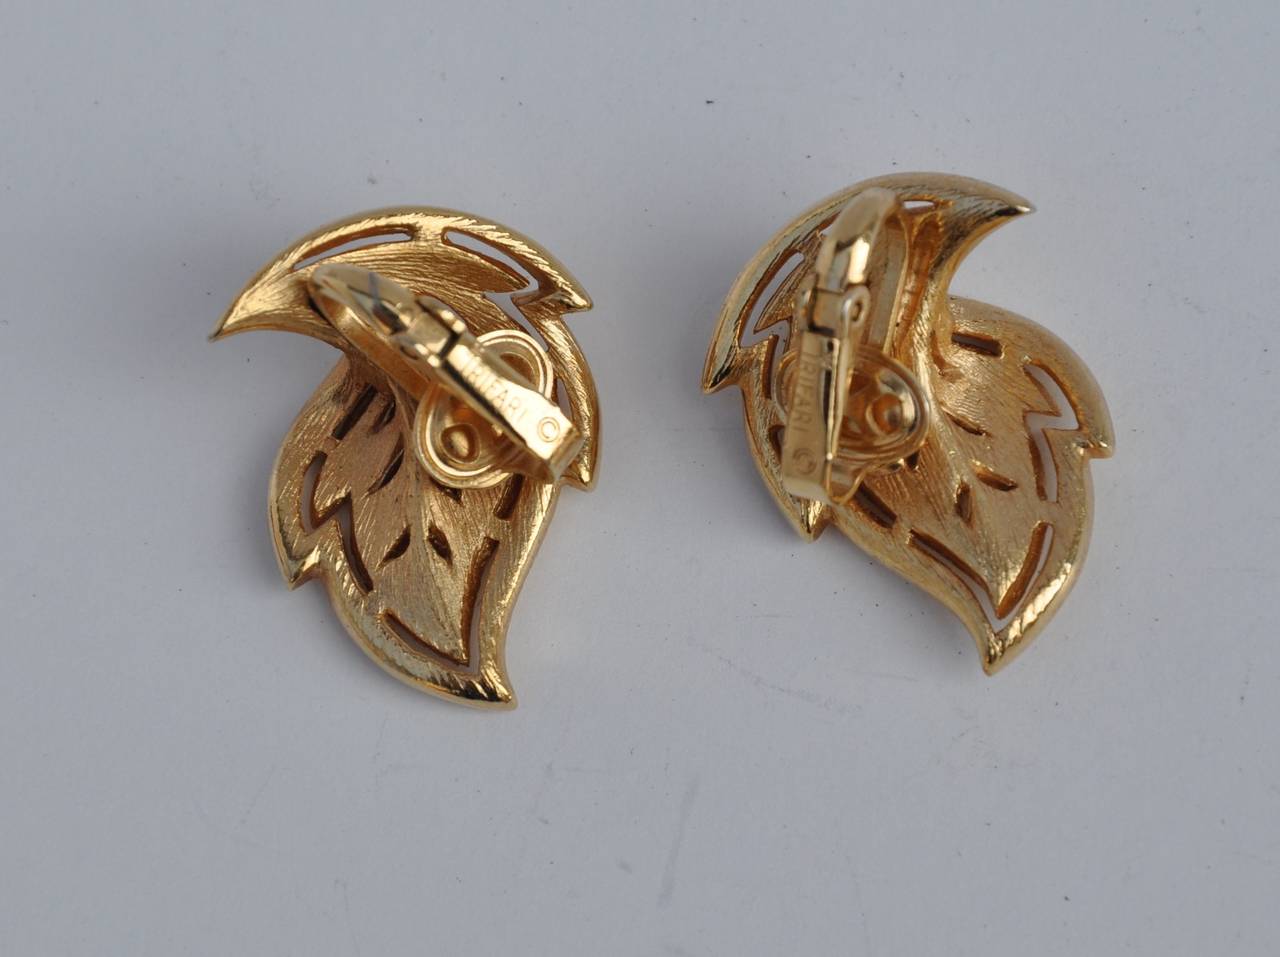 Trifari etched gilded gold tone "Leaf" ear clips measures 1" in height, 6/8" in width and 1/2" in depth. Earrings are signed on the backside.